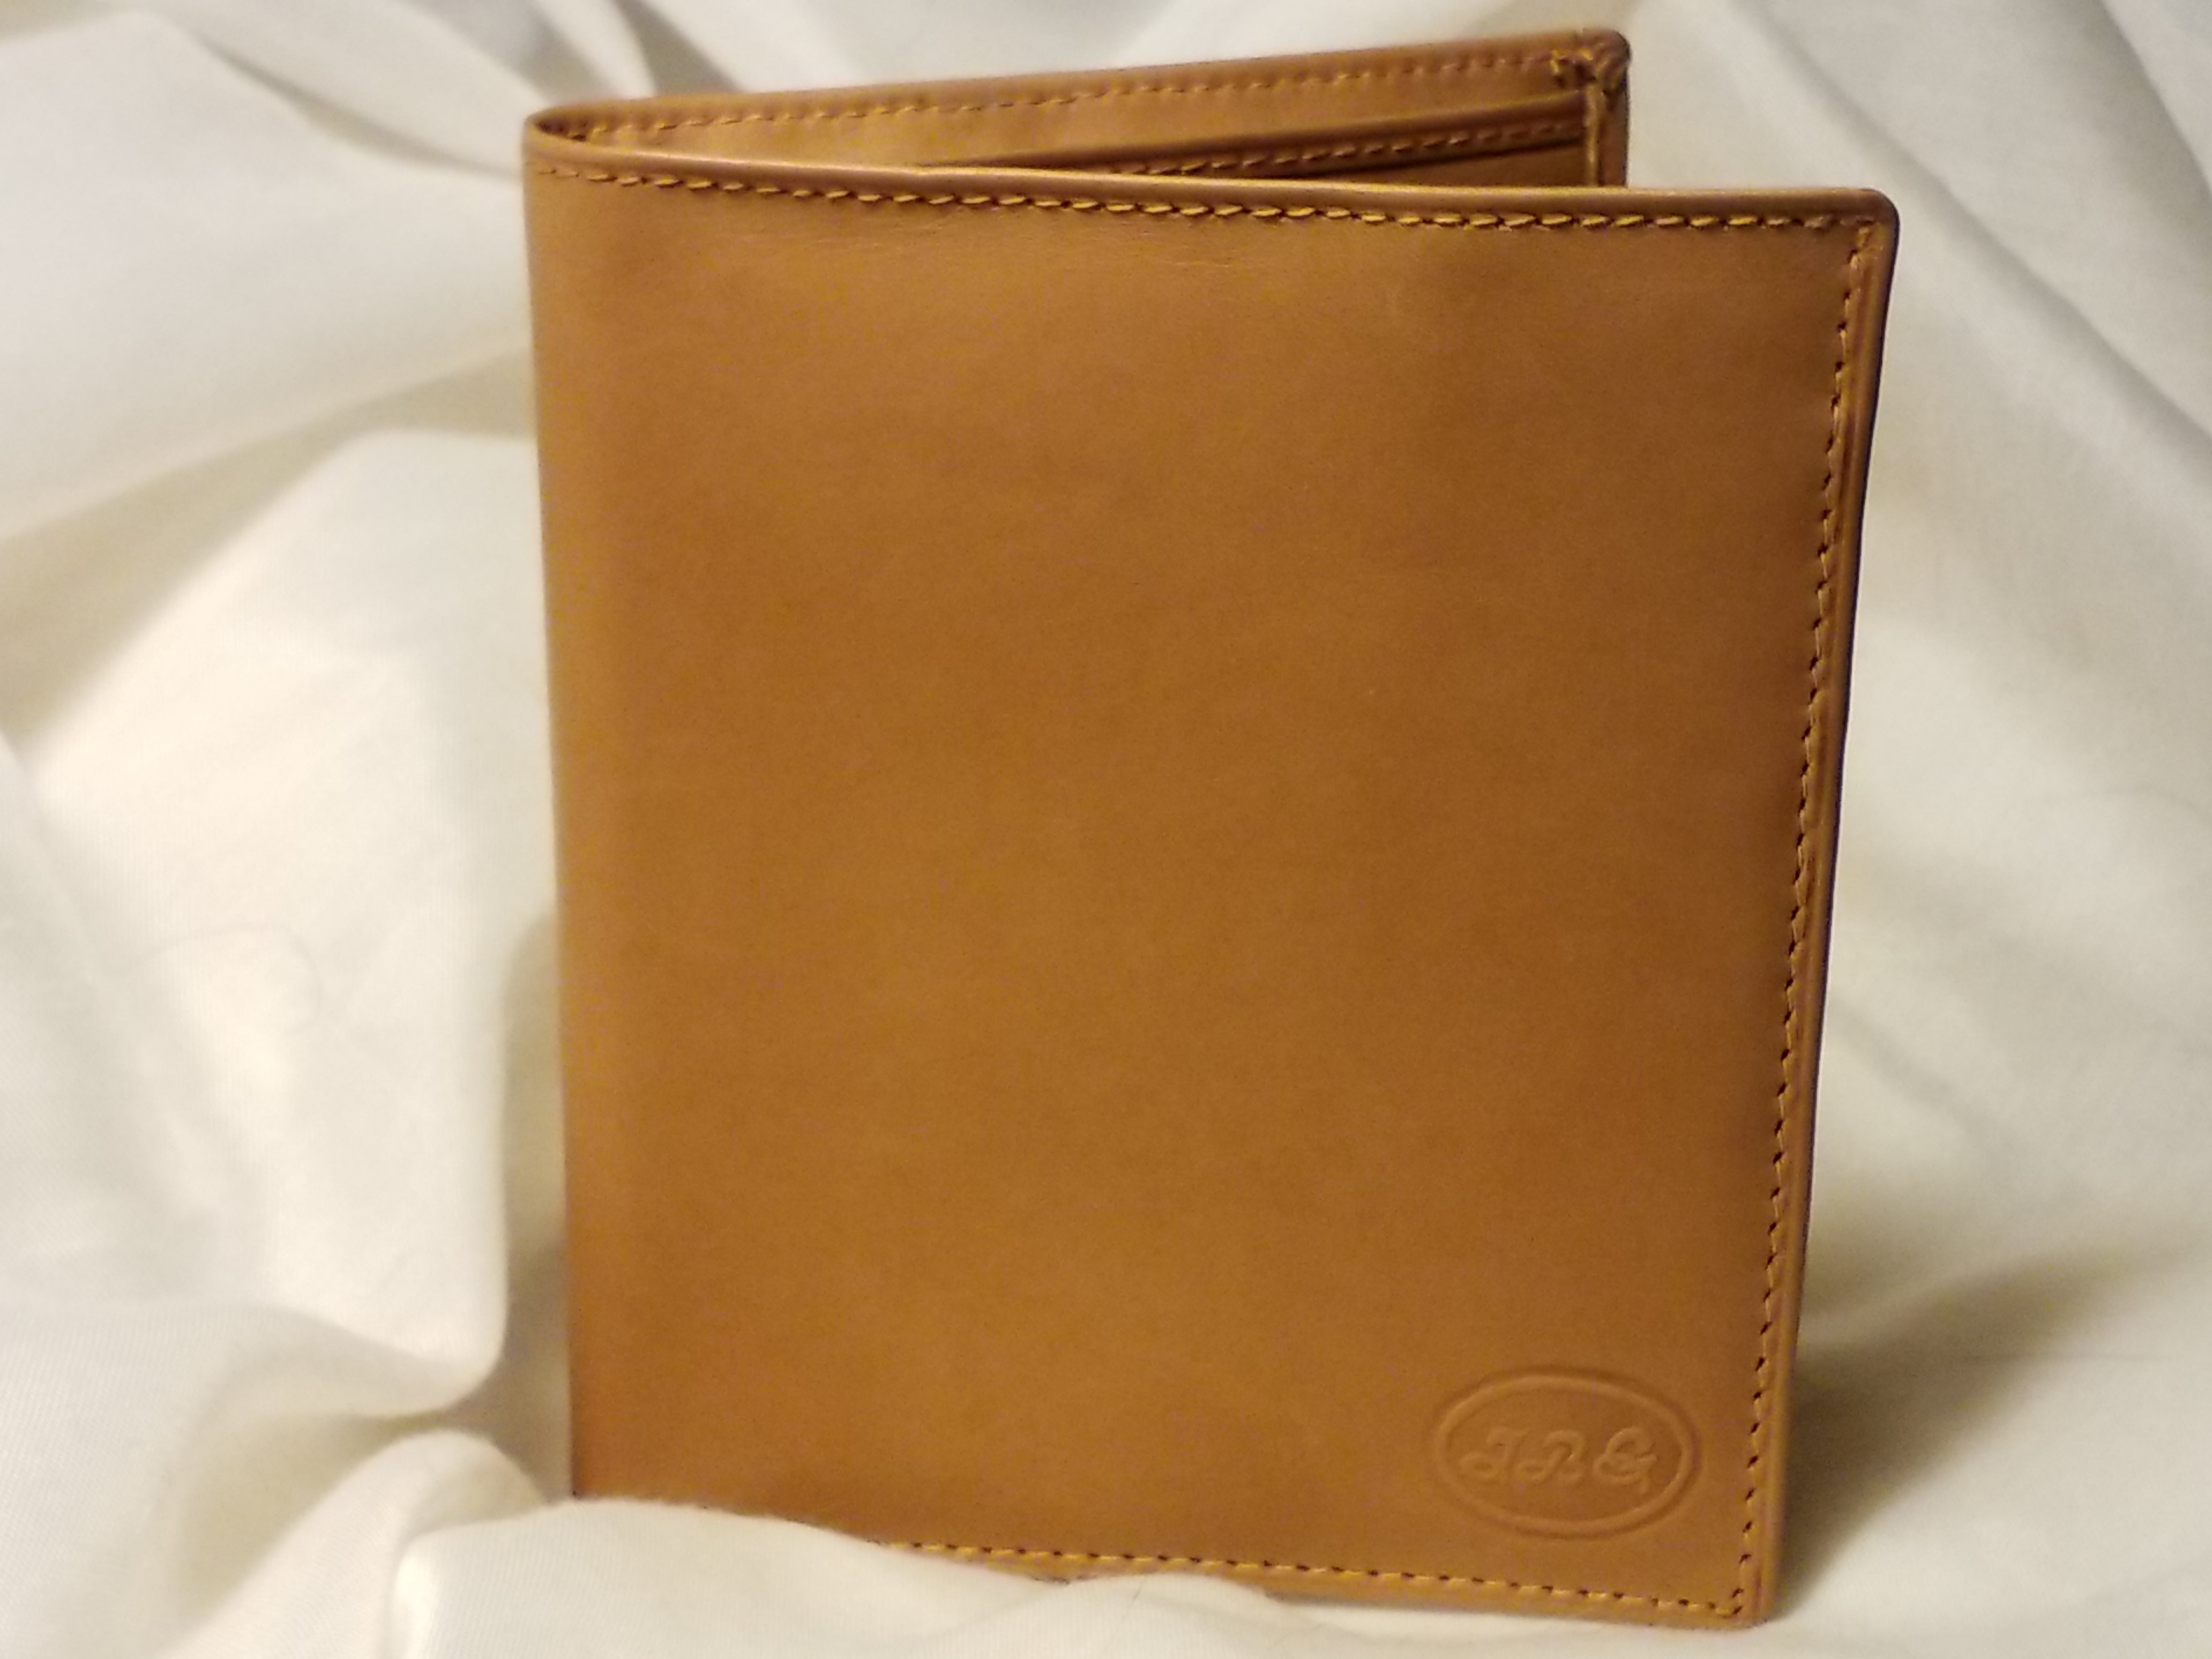 Leather Wallet - Two colour options - CLEARANCE - 25% off will be applied in store, or at checkout!